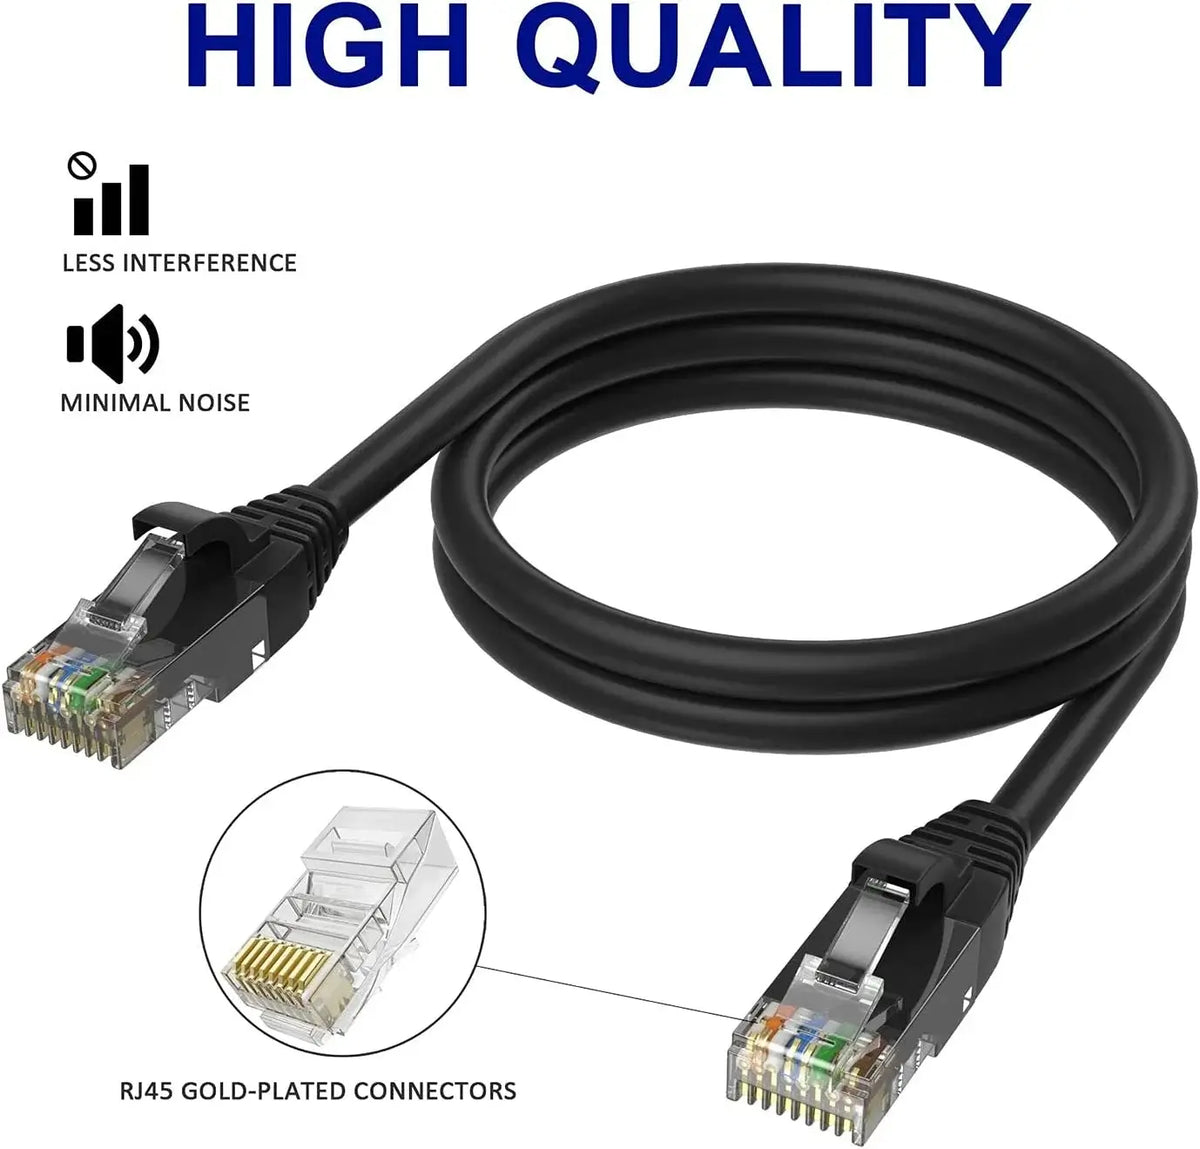 H.View 18M 30M 40M 50M Ethernet Network Cable Rj45 Patch Outdoor Waterproof  Cable Wires For Cctv Poe Ip Camera System